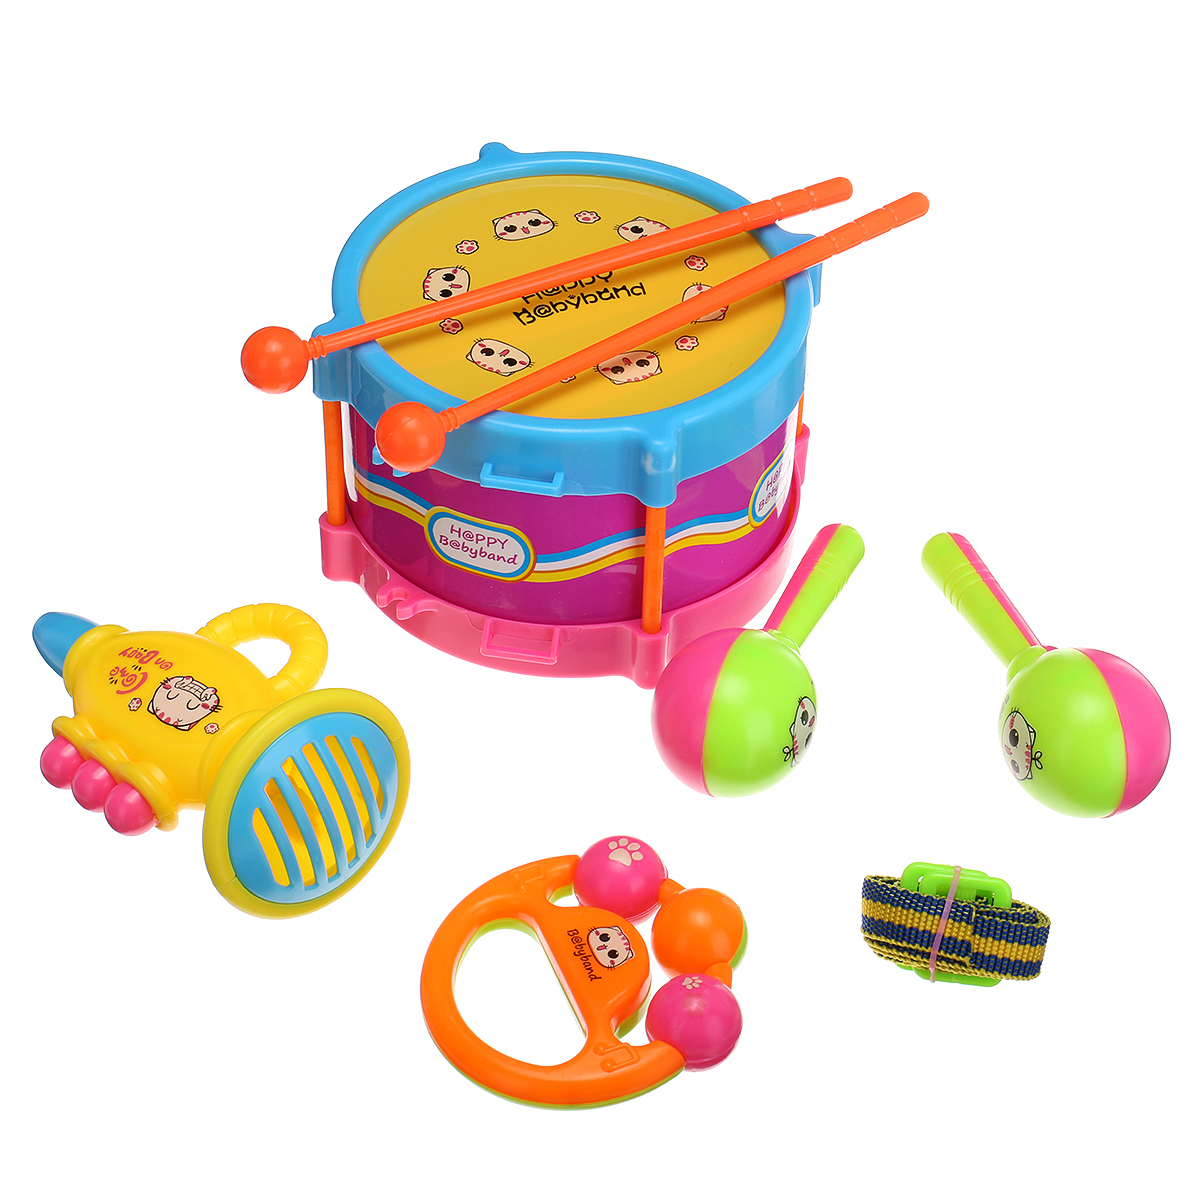 7 PCS Baby Kids Roll Drum Musical Instruments Band Children Percussion Toy Gift